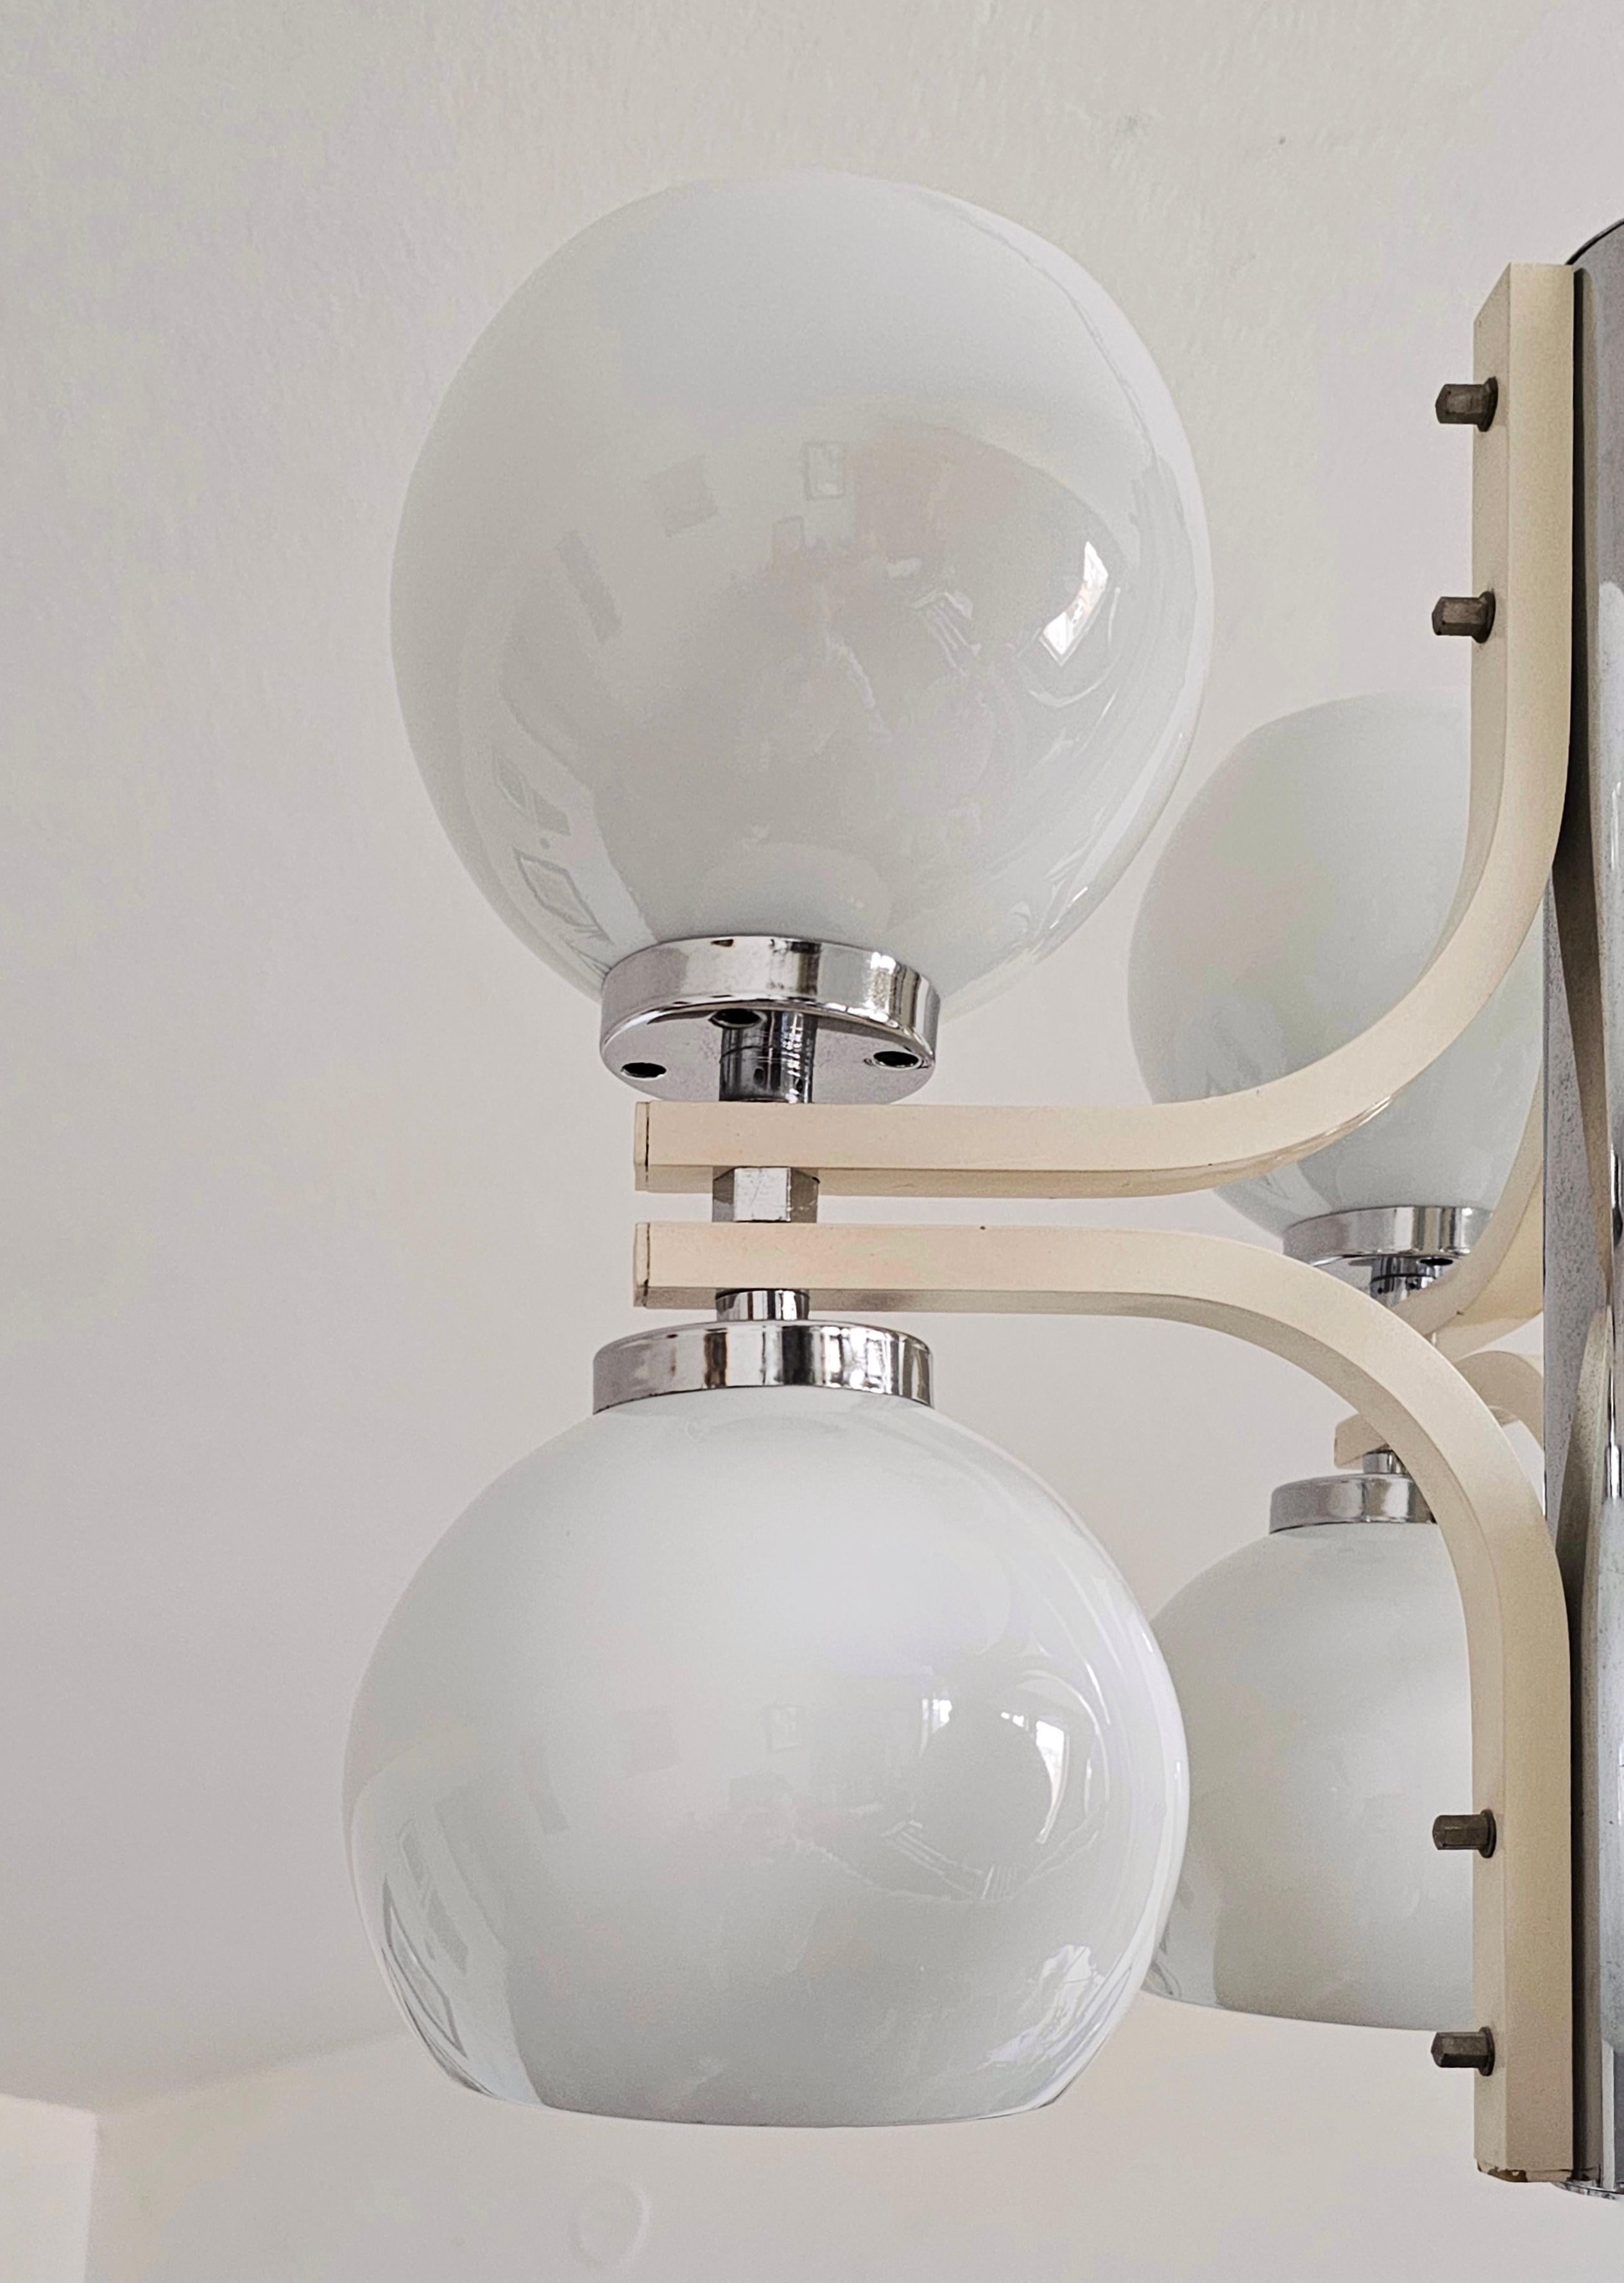 Space Age 8-Light Chandelier with While Glass Shades, Yugoslavia 1970s For Sale 3